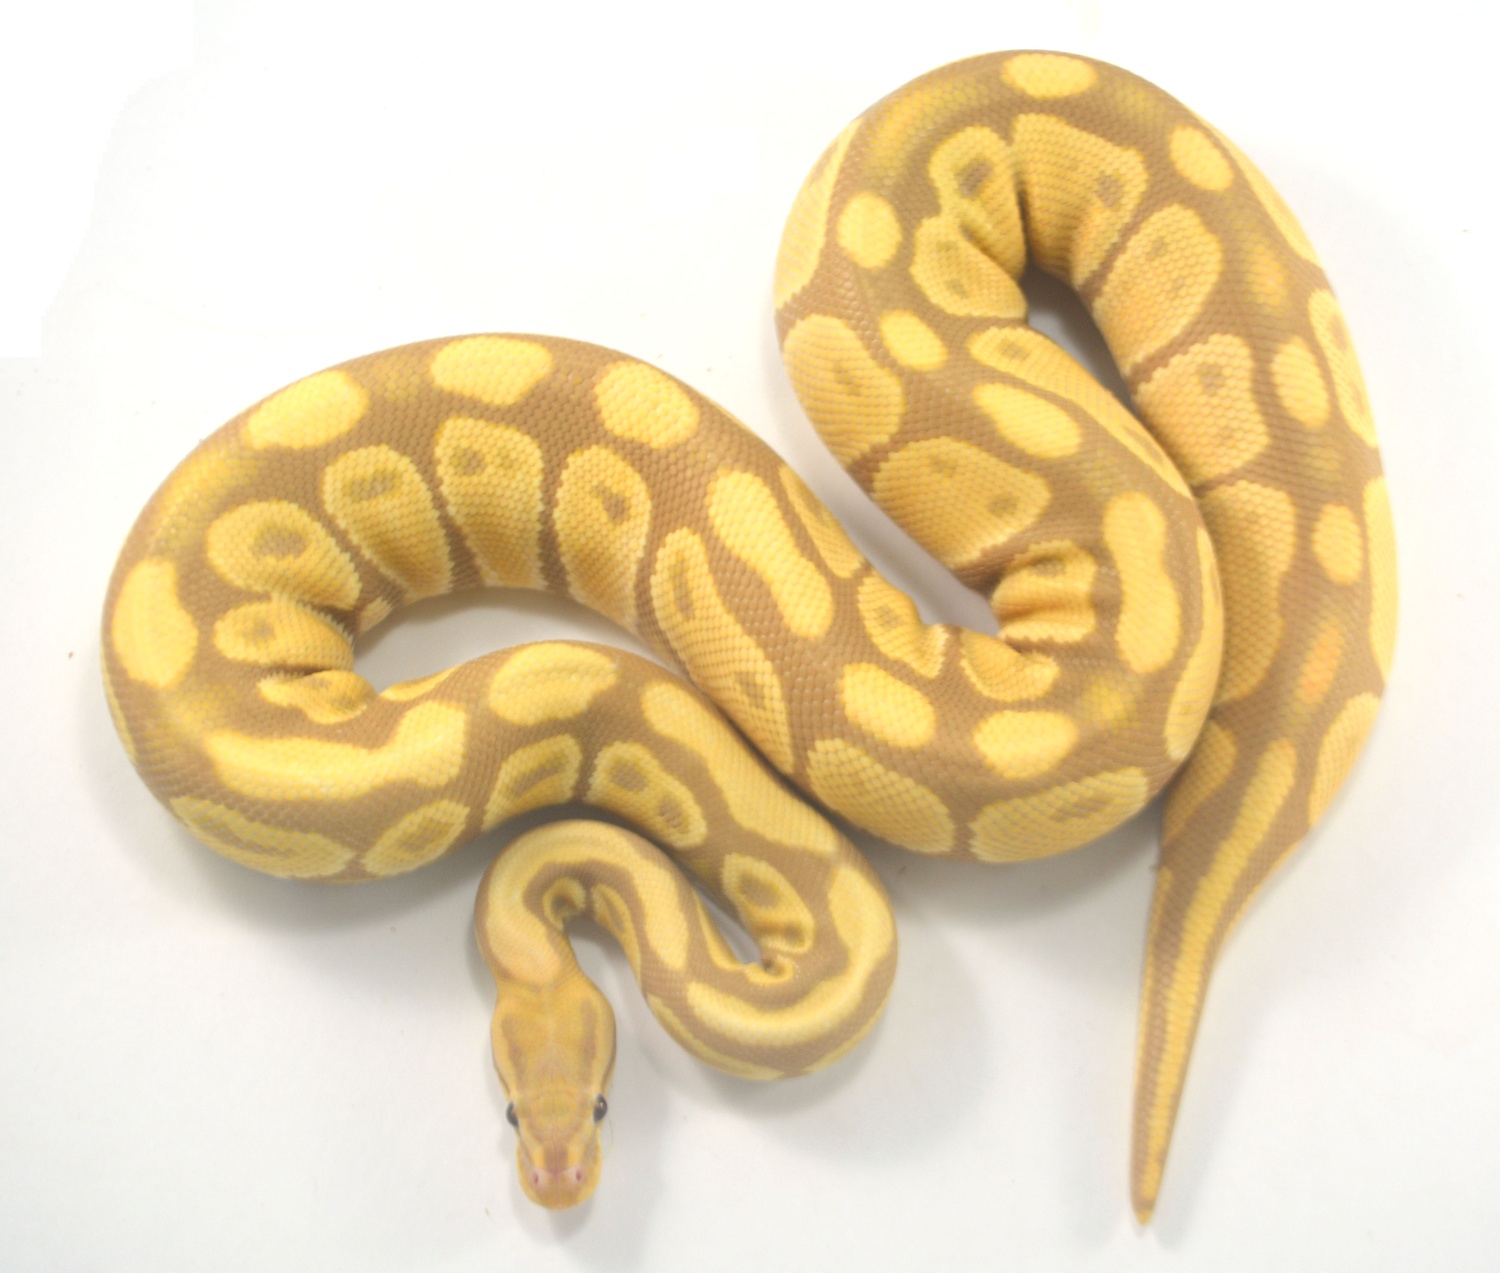 Candy Ball Python by ReptileKreations